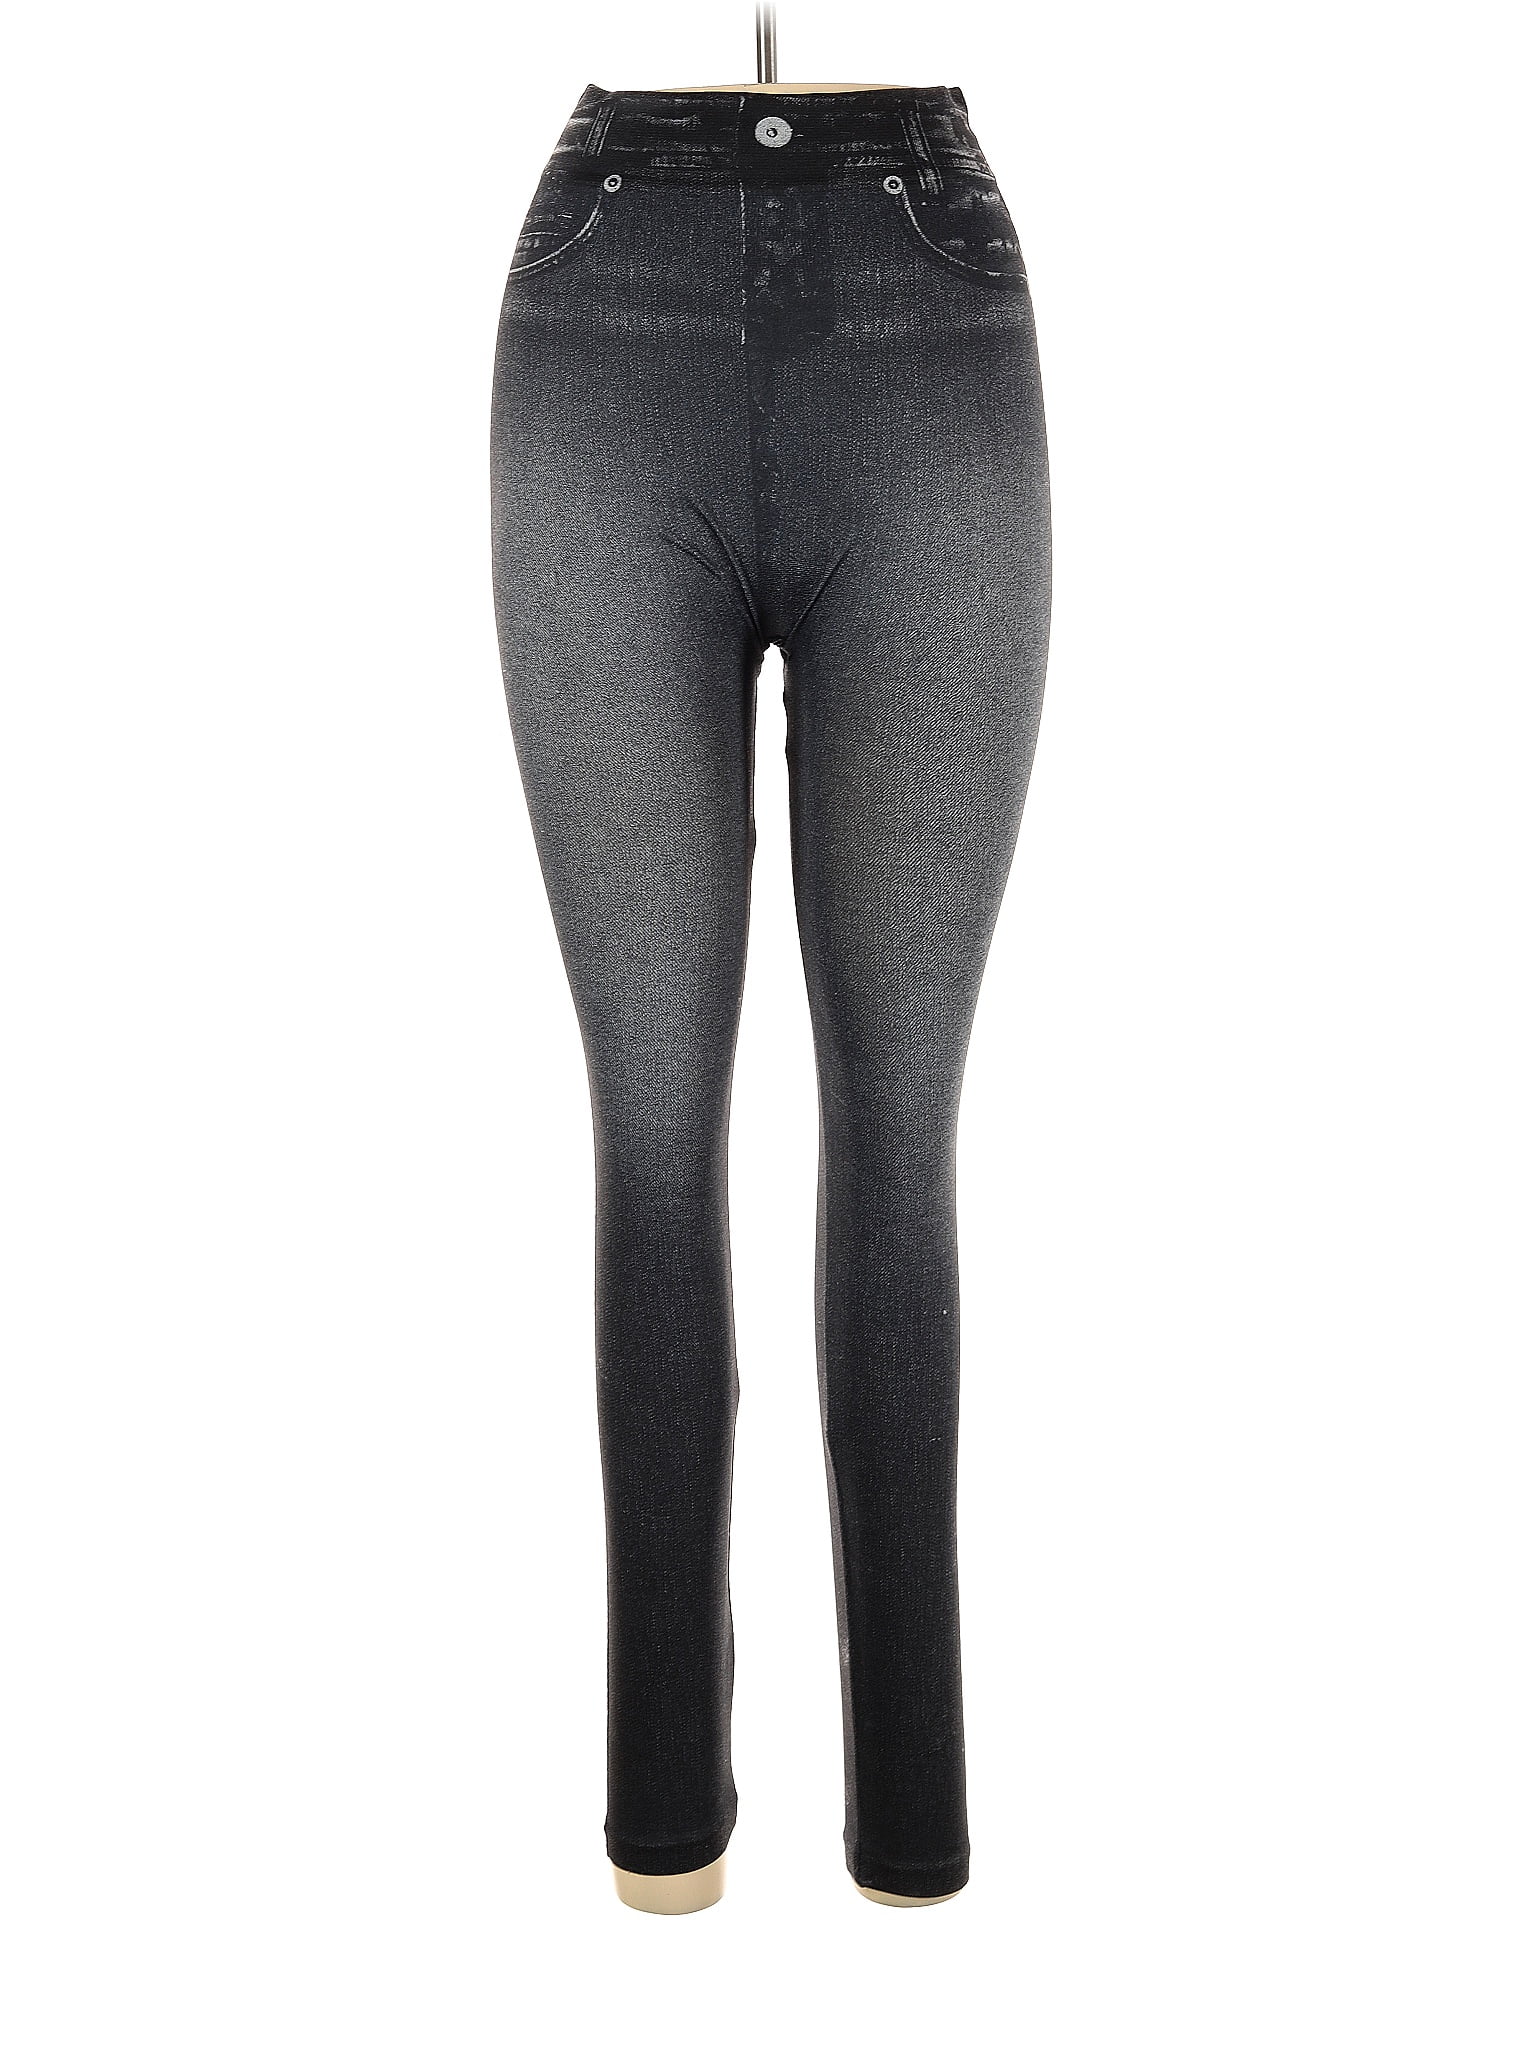 Leggings Park Women's Clothing On Sale Up To 90% Off Retail